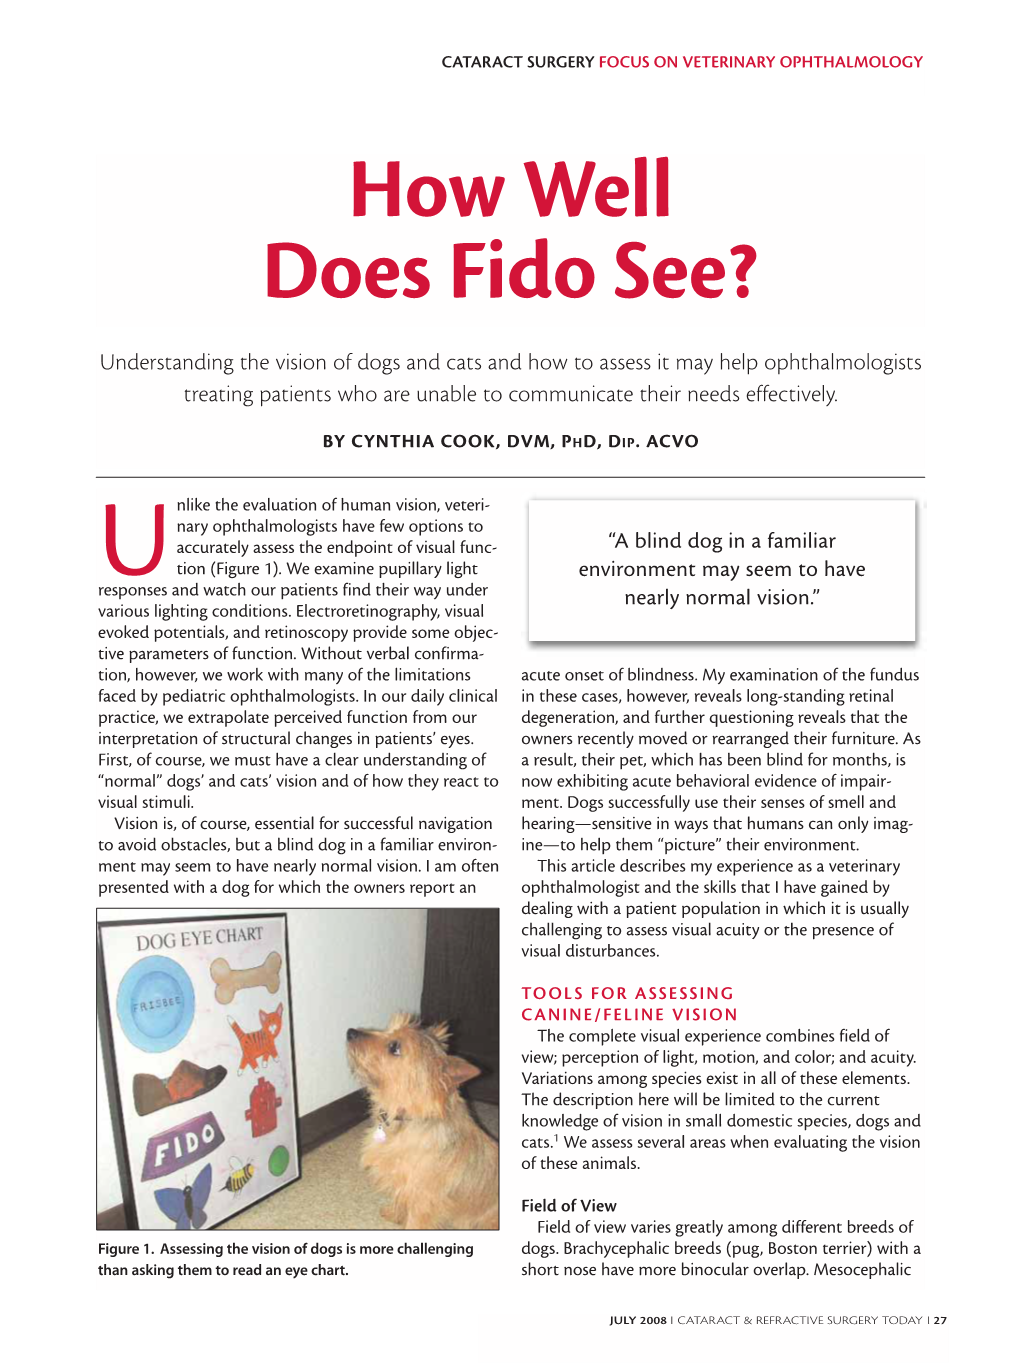 How Well Does Fido See?